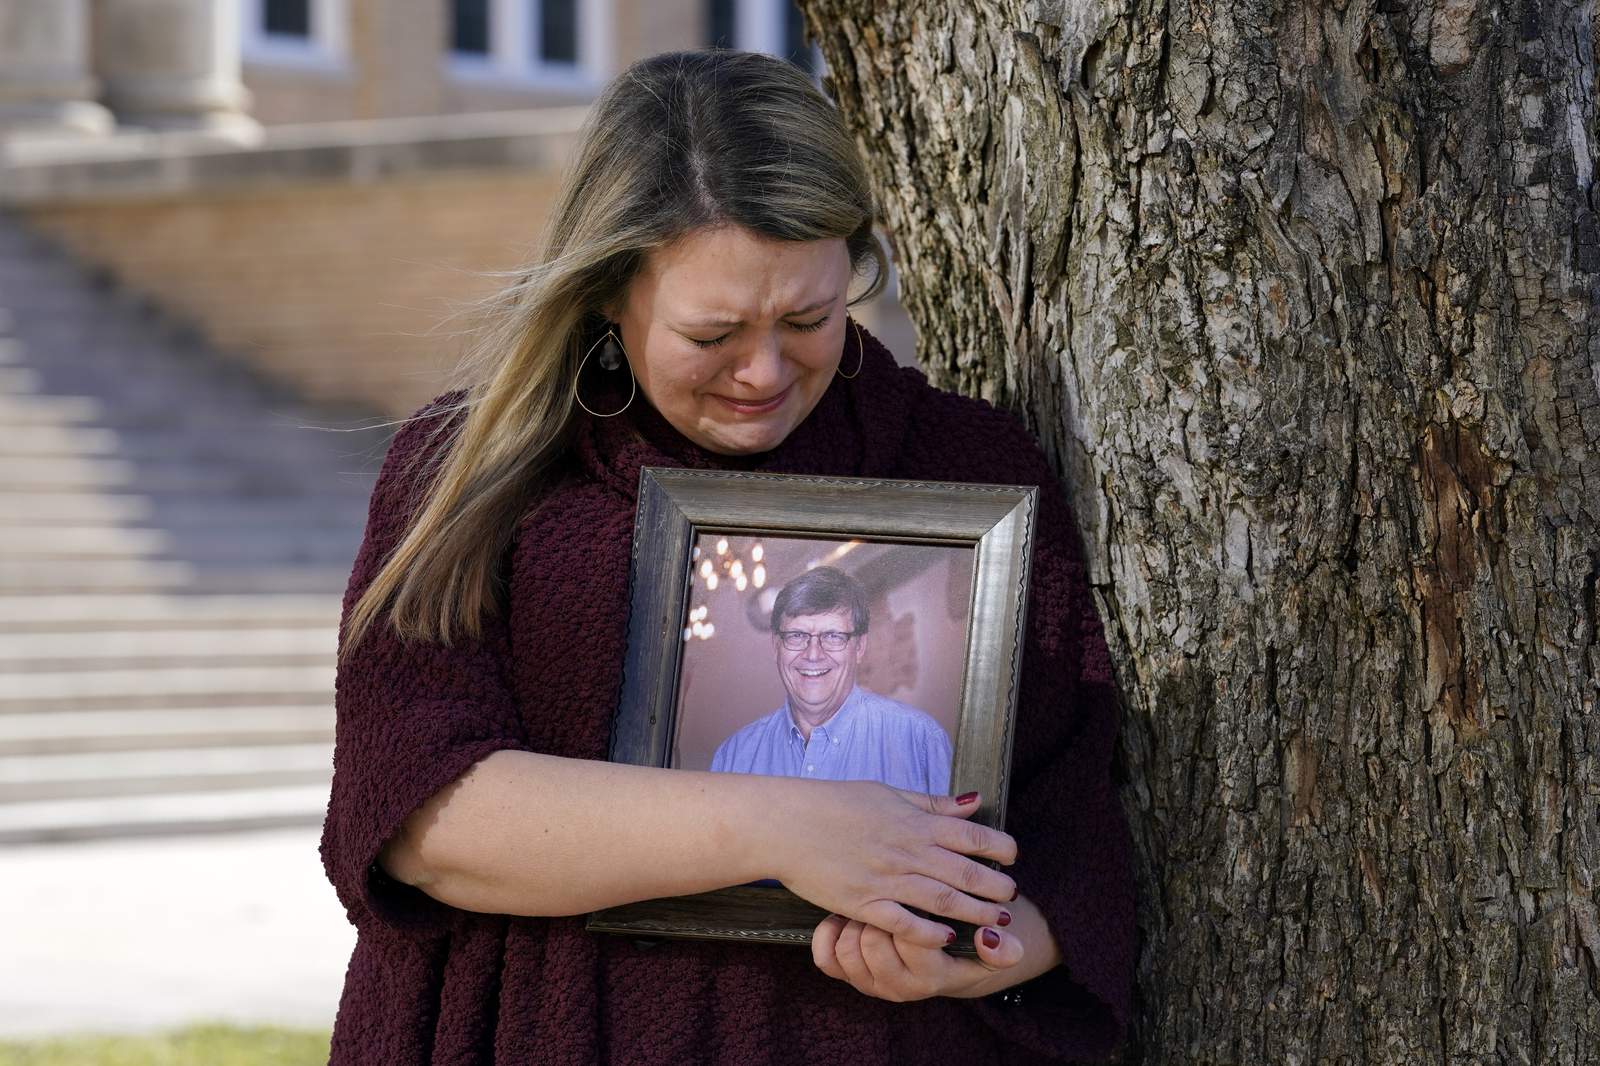 Virus rules not enforced. Grieving Texas family asks: Why?